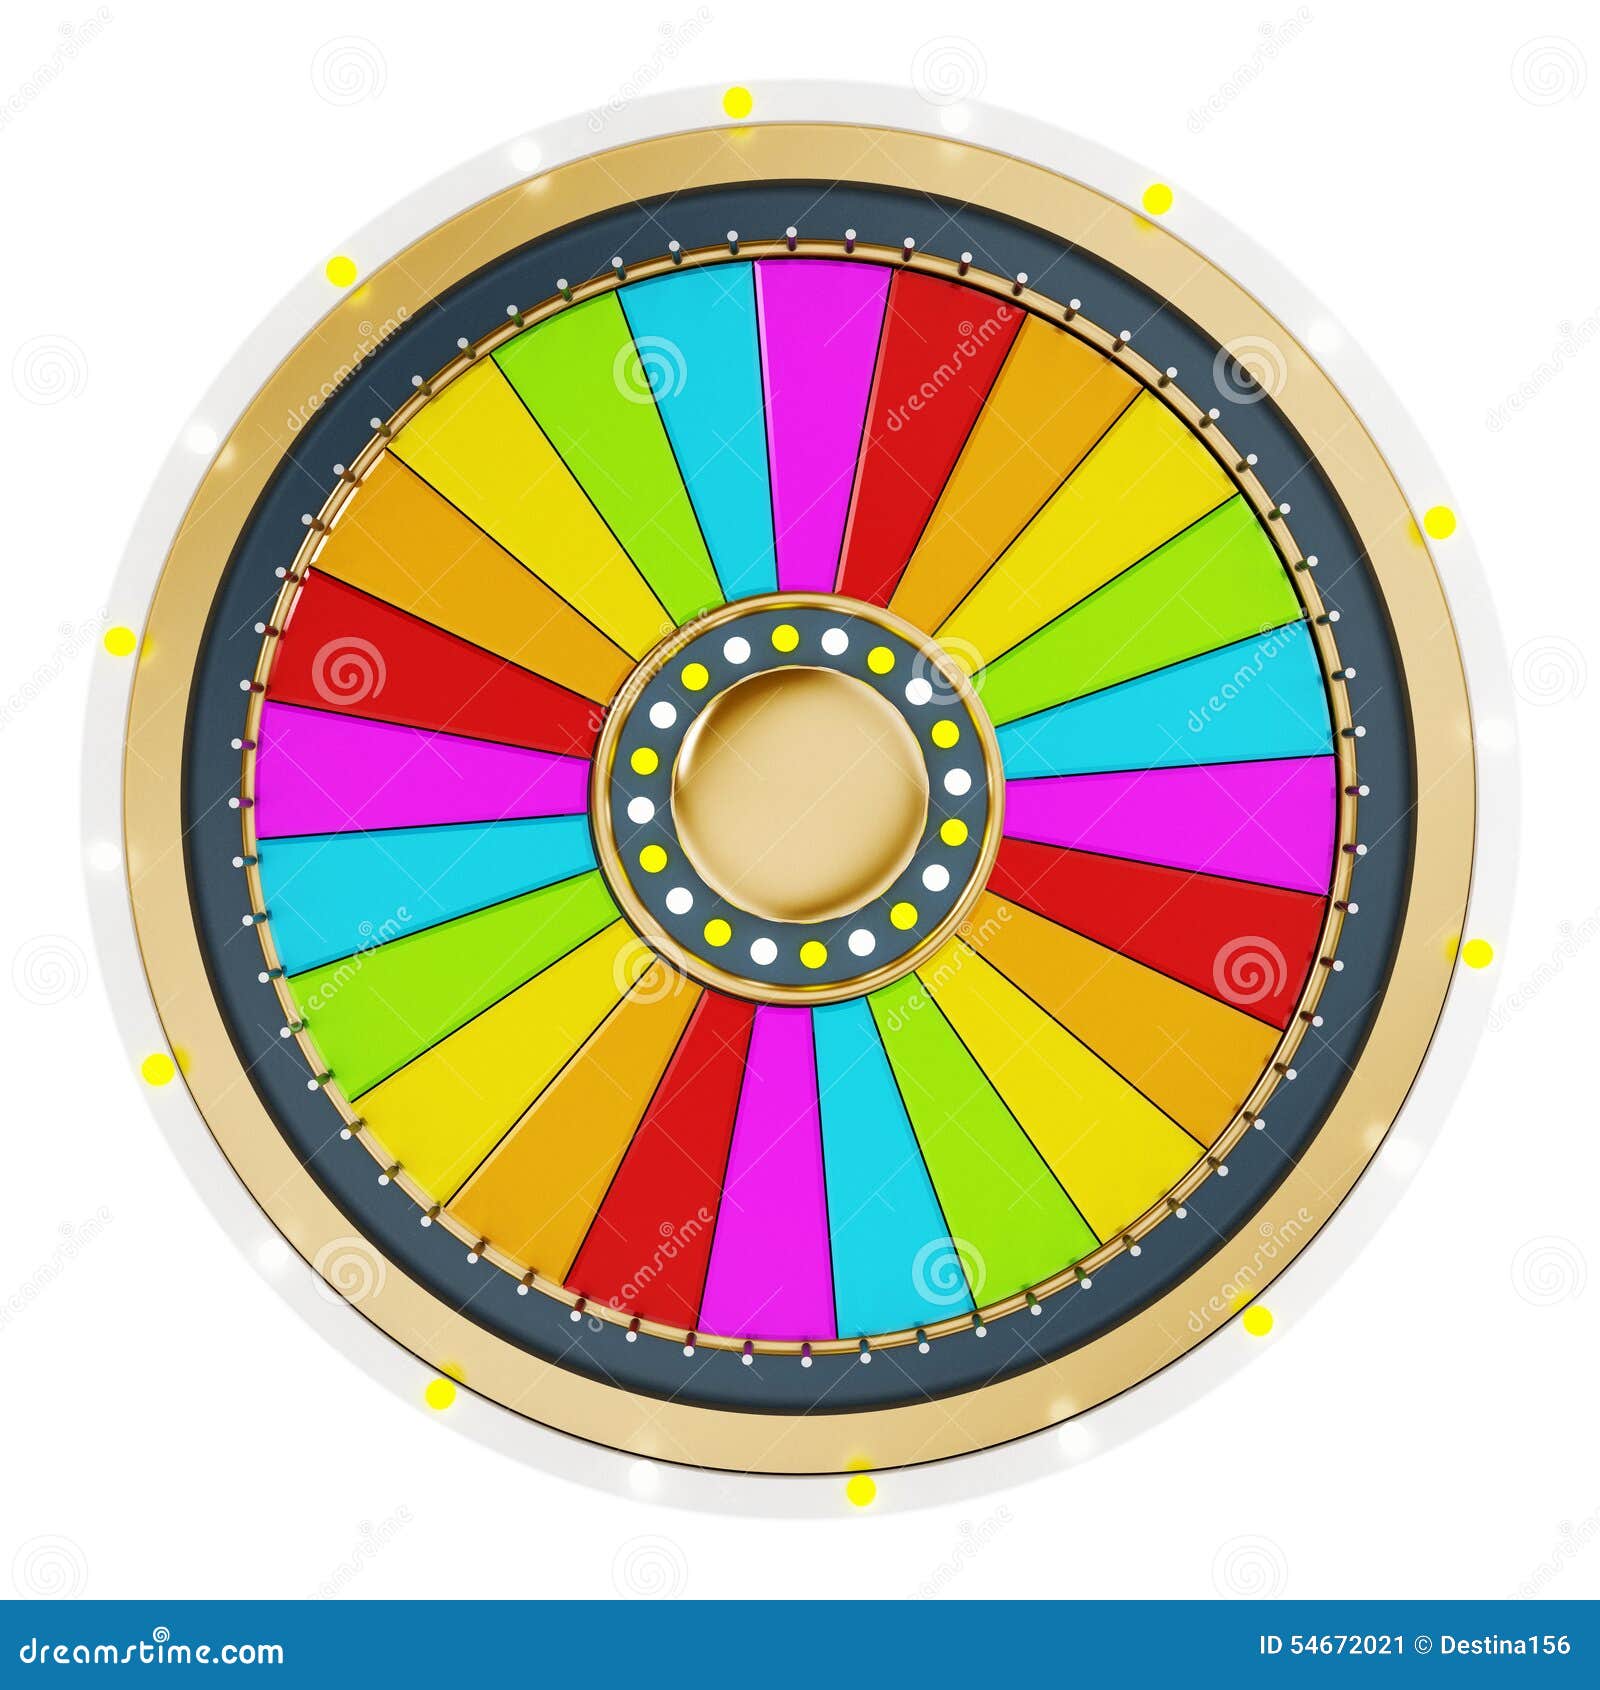 96 Inch Insert Your Own Graphics Prize Wheel - Spinning Designs